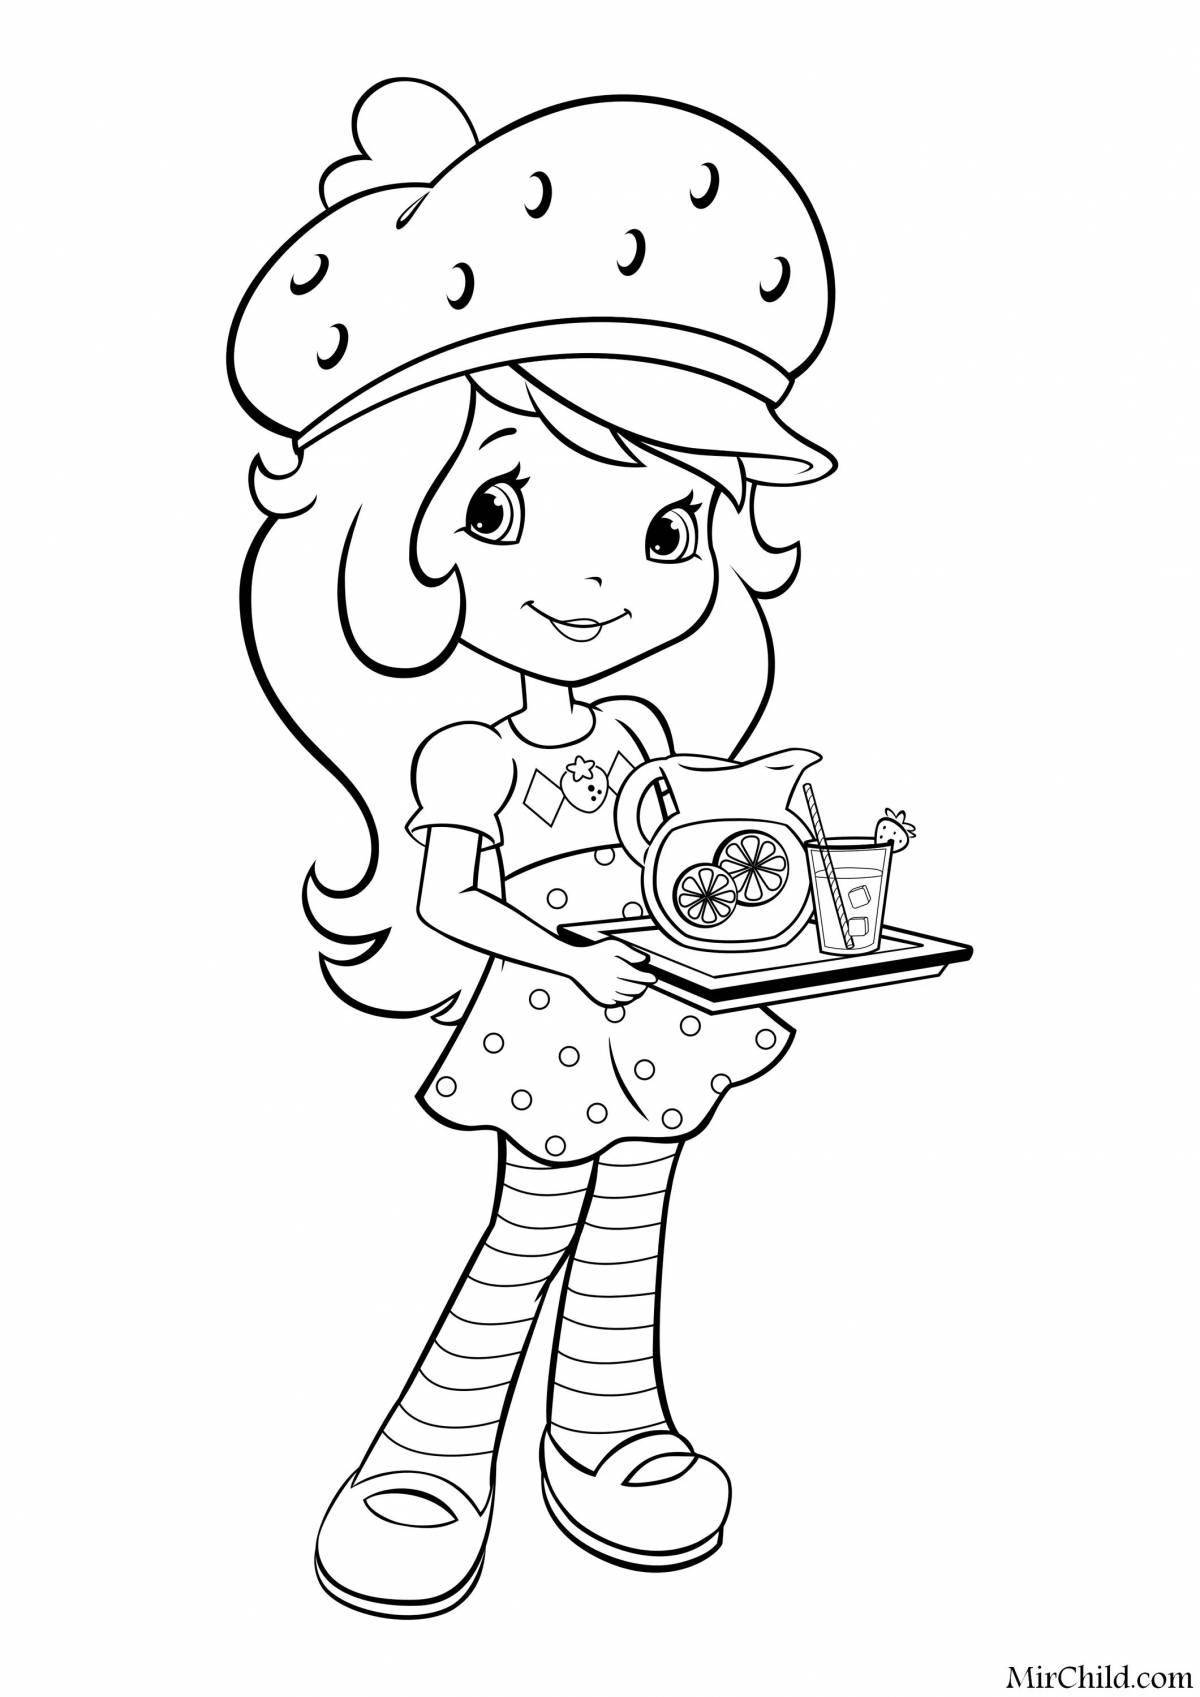 Bright strawberry coloring page